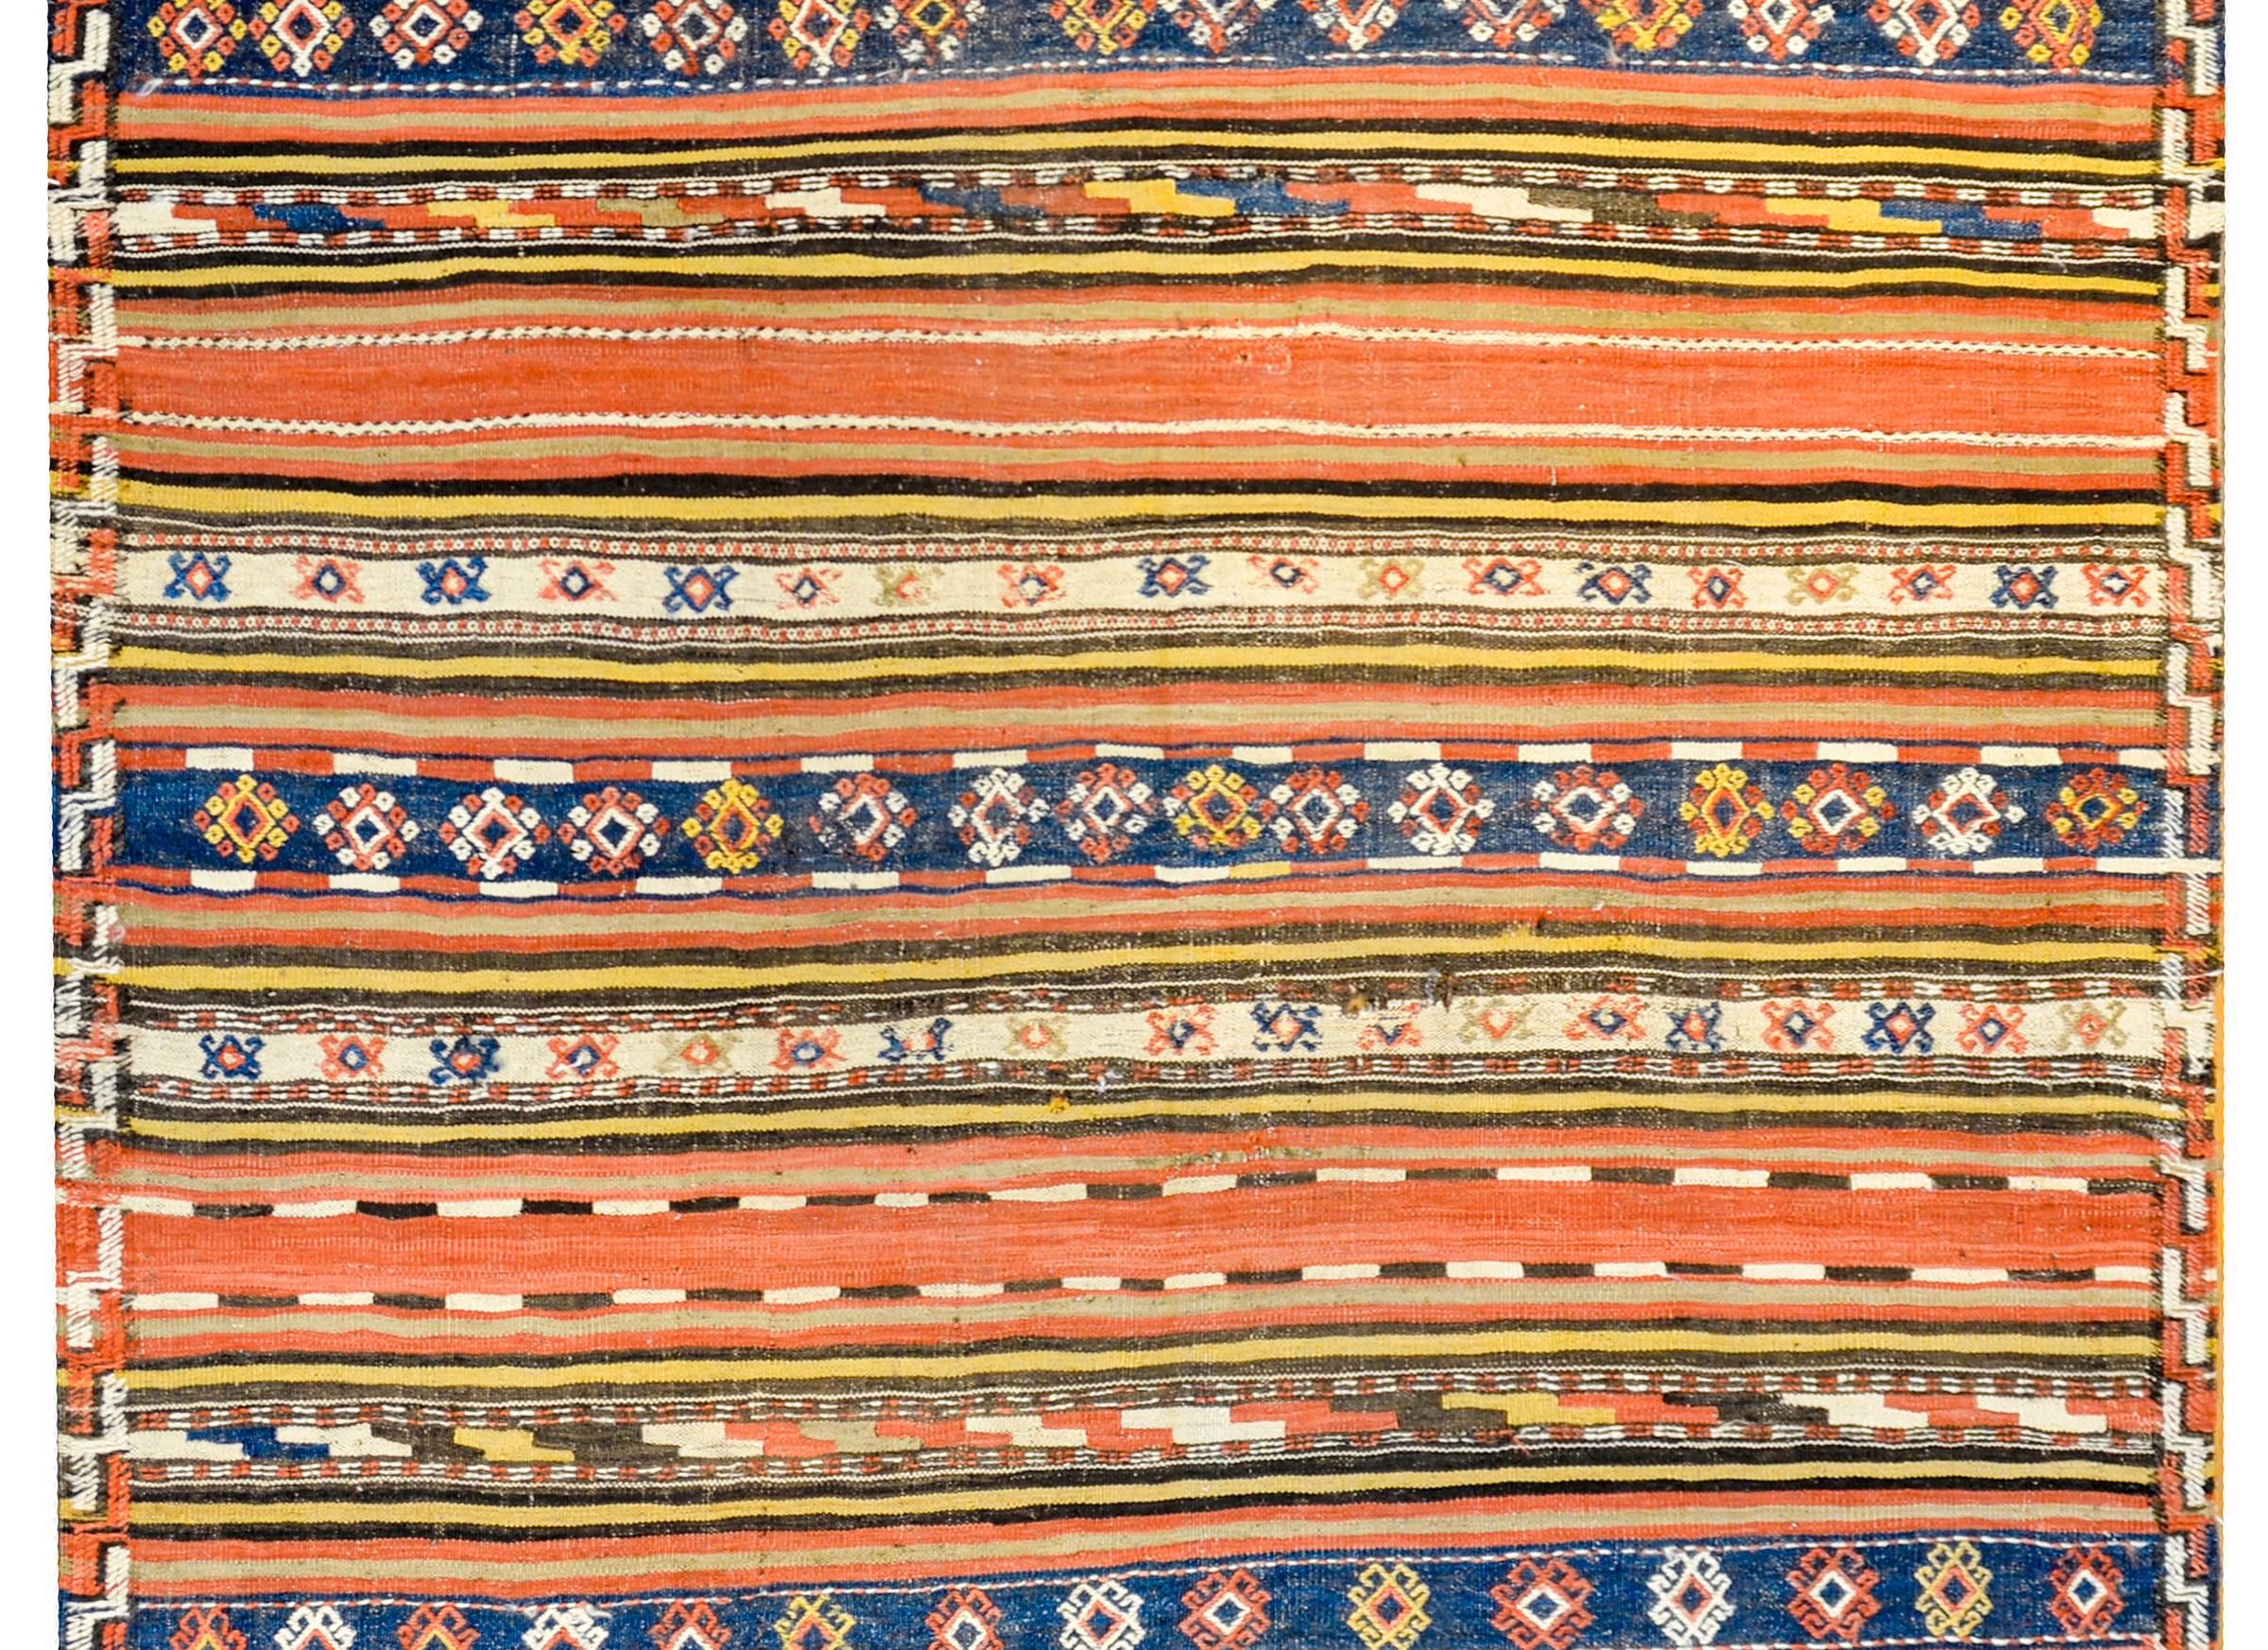 A wonderful early 20th century Persian Shahsevan Kilim rug with alternating boldly colored multicolored stripes of geometric and striped design. The border is thin with striped and zigzag pattern.